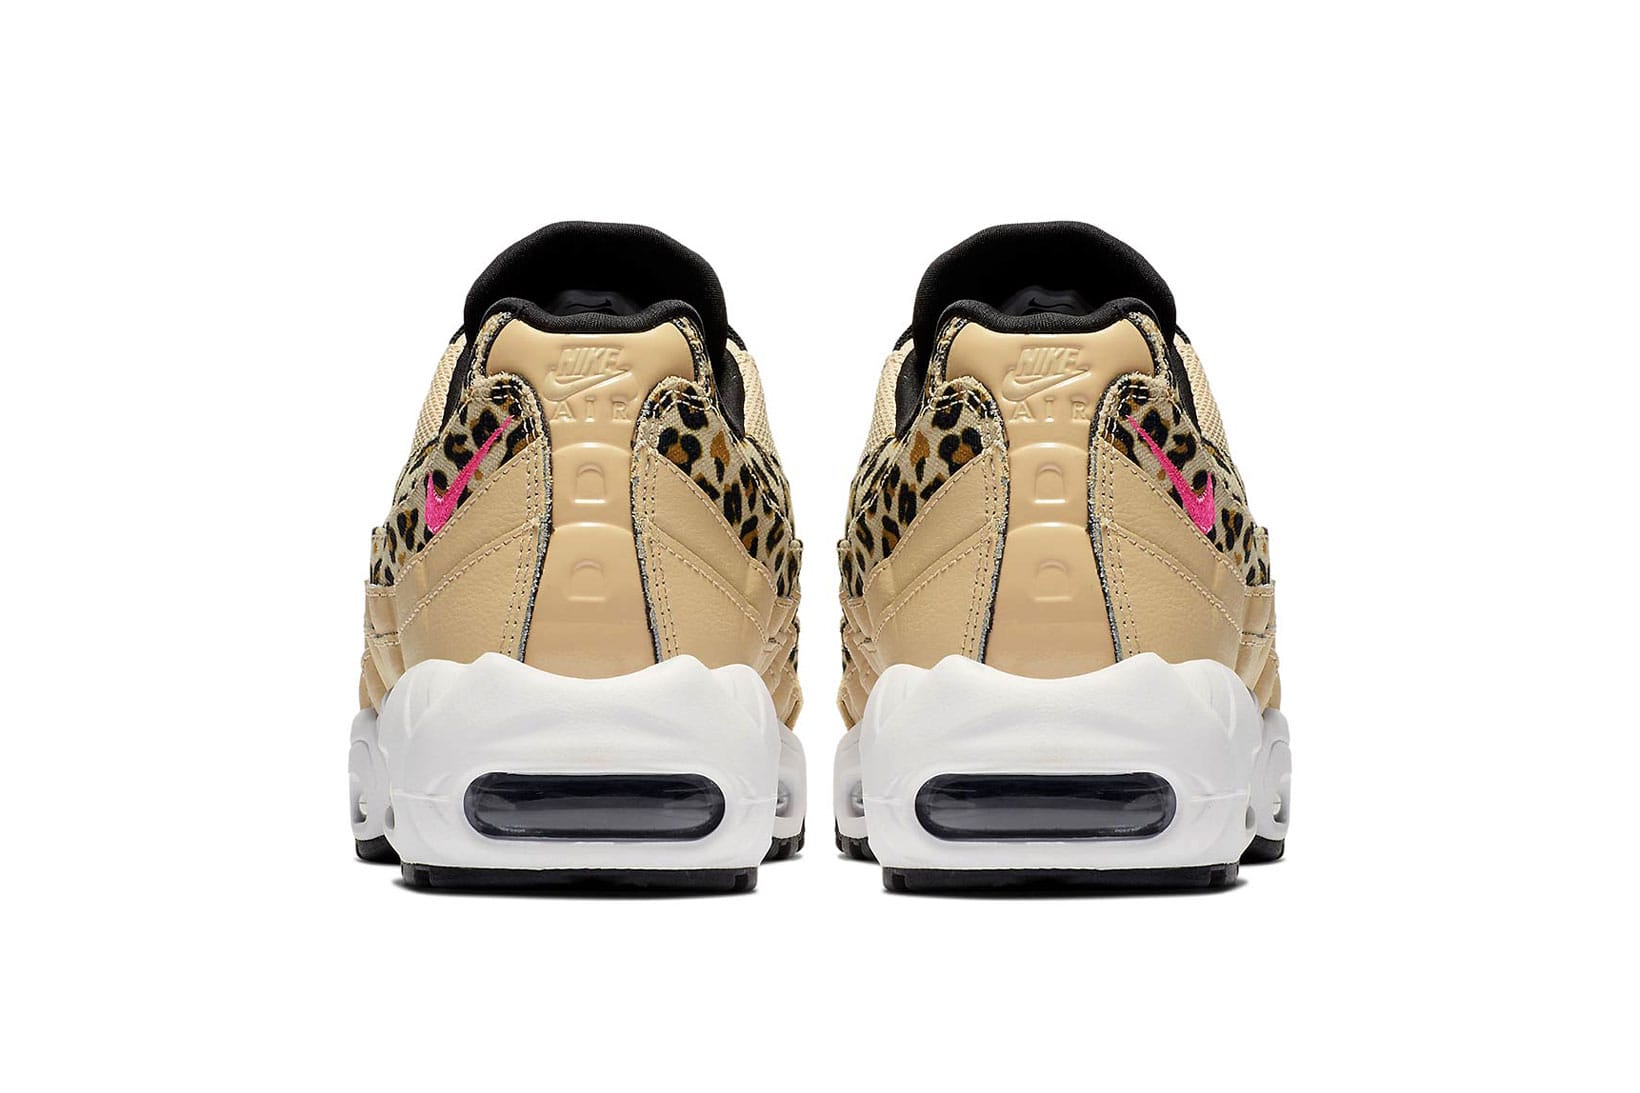 Nike's Air Max 95 Leopard Print and 